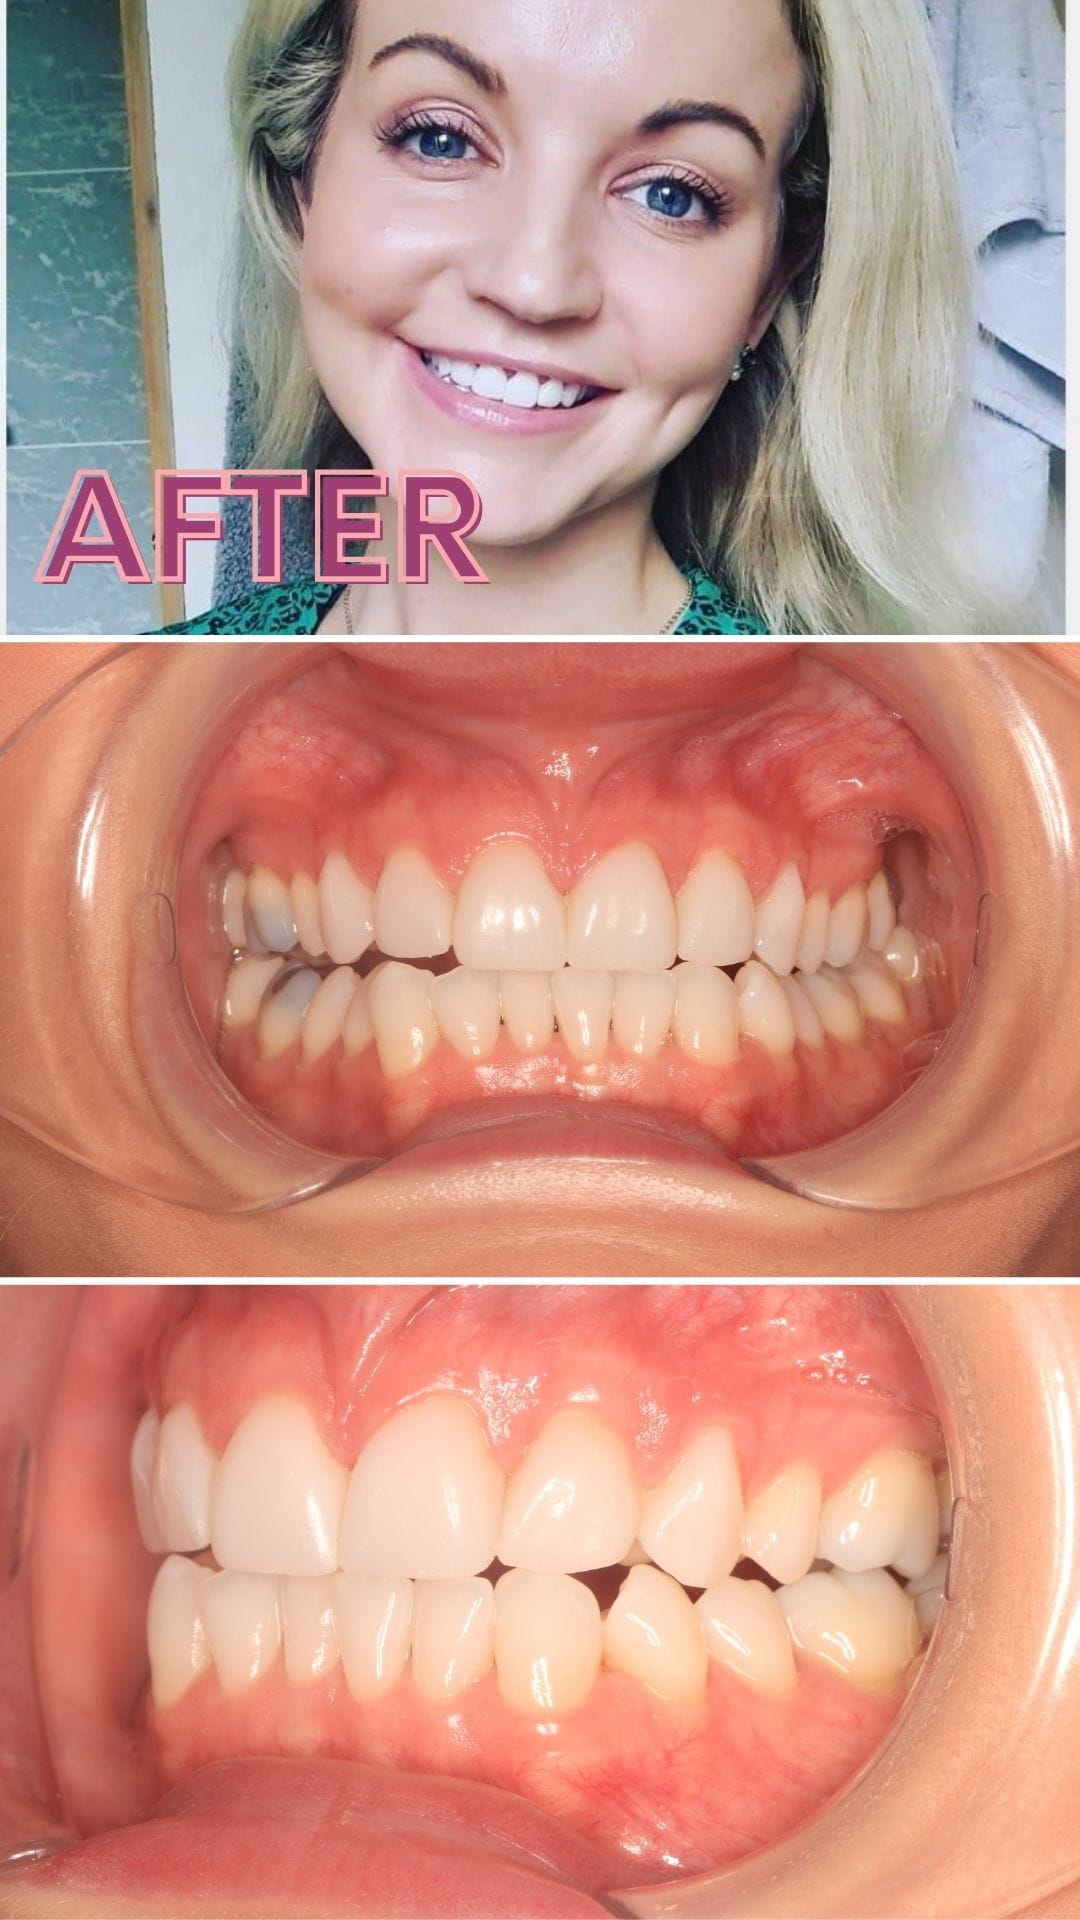 Before and after a smile makeover with Smile Fast